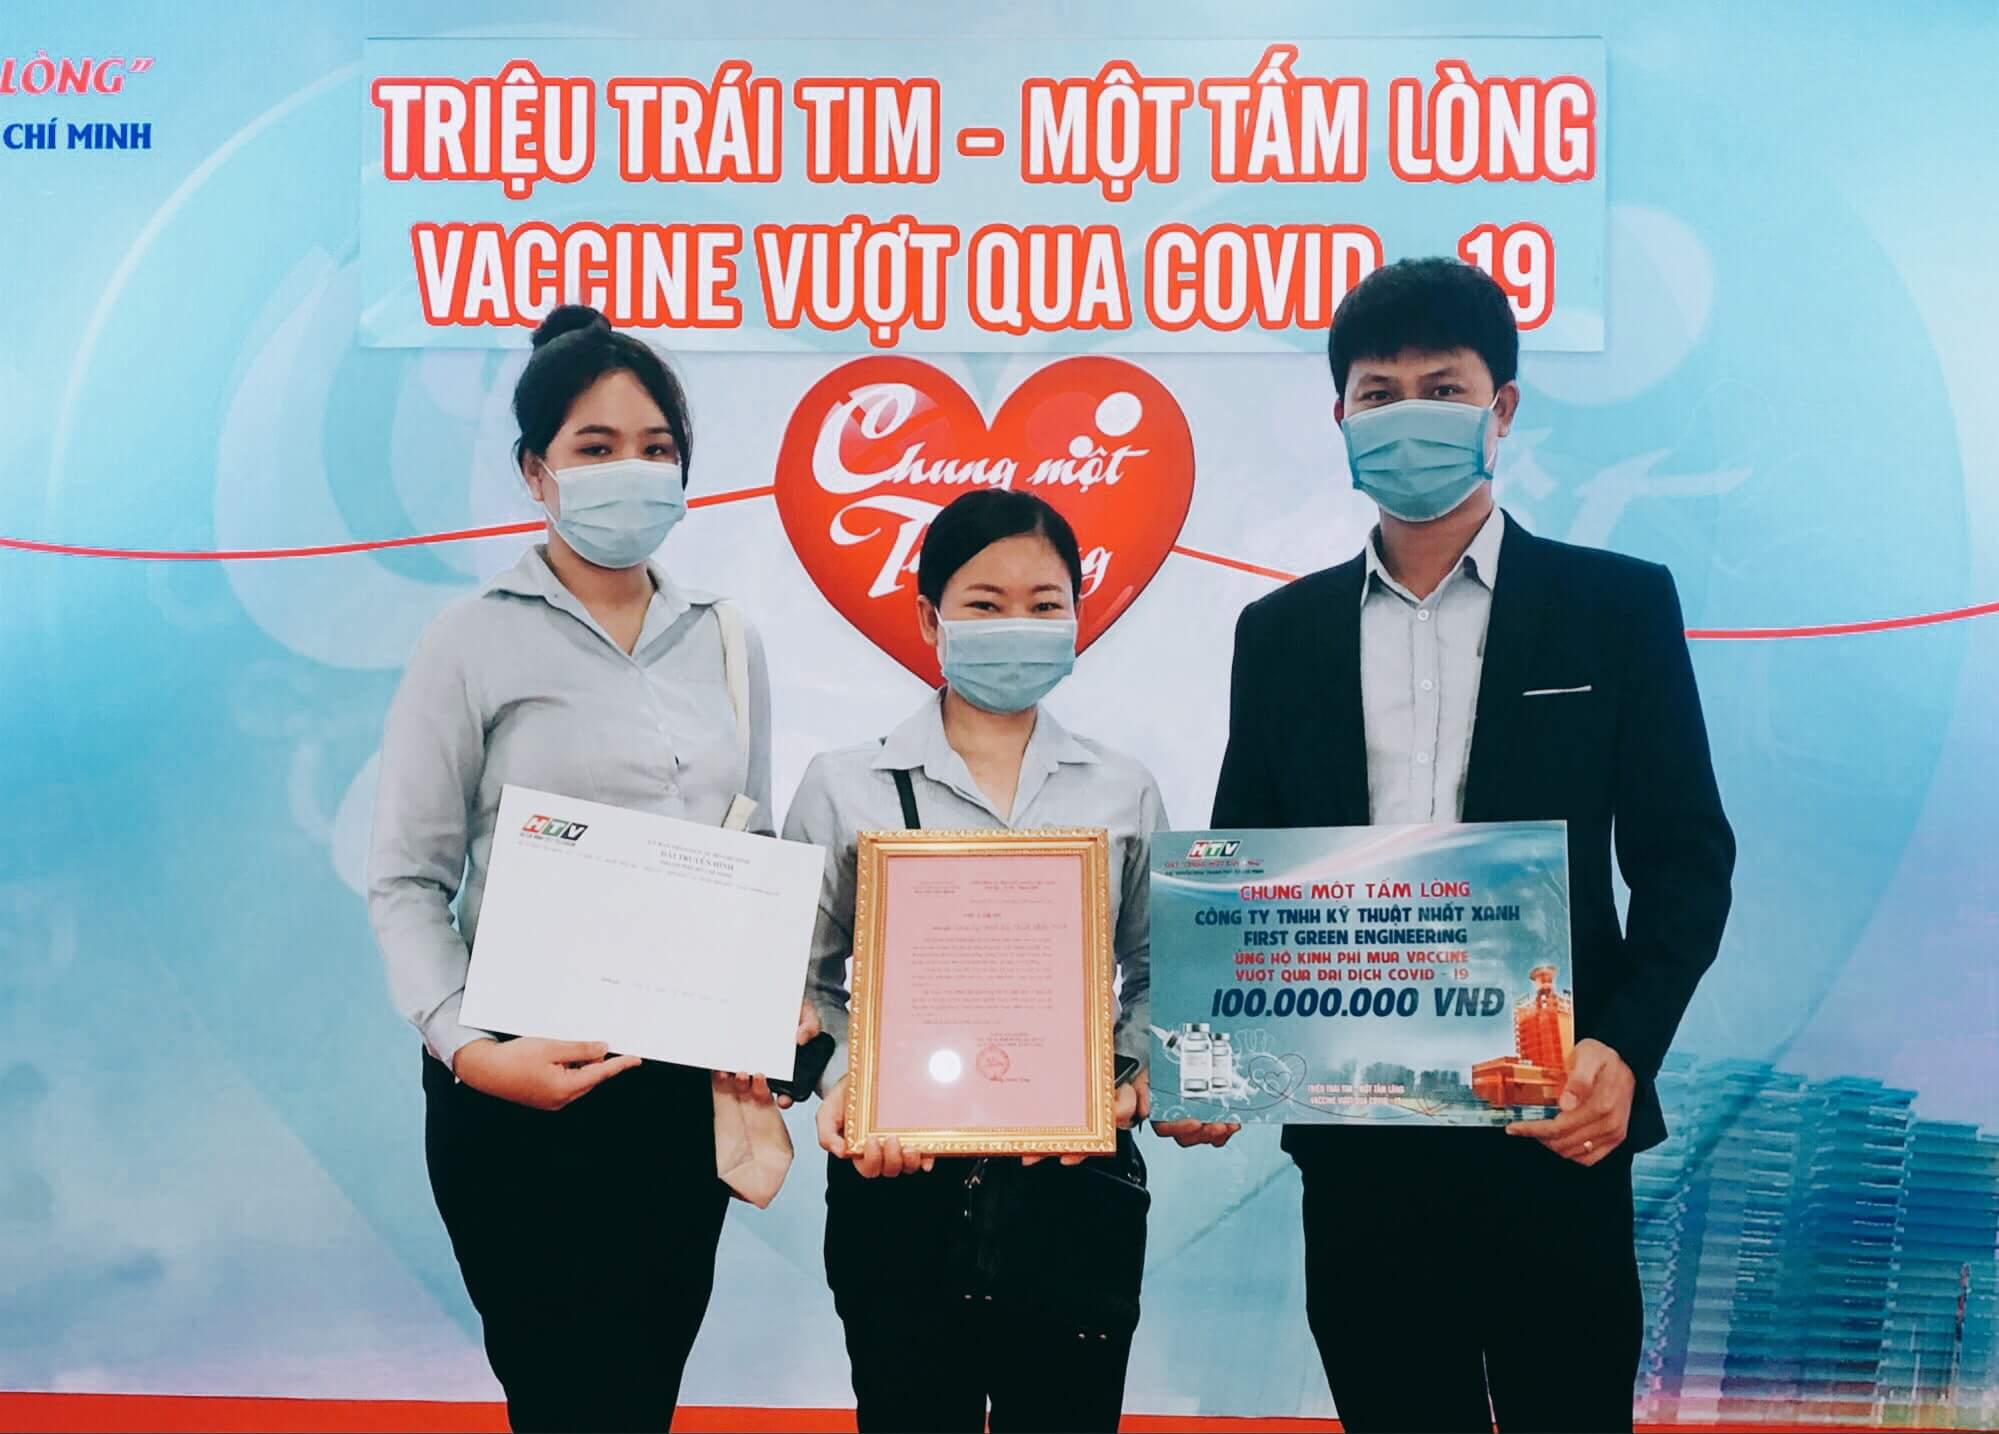 FIRST GREEN ENGINEERING CONTRIBUTES TO THE VACCINE FUND “CHUNG MOT TAM LONG”